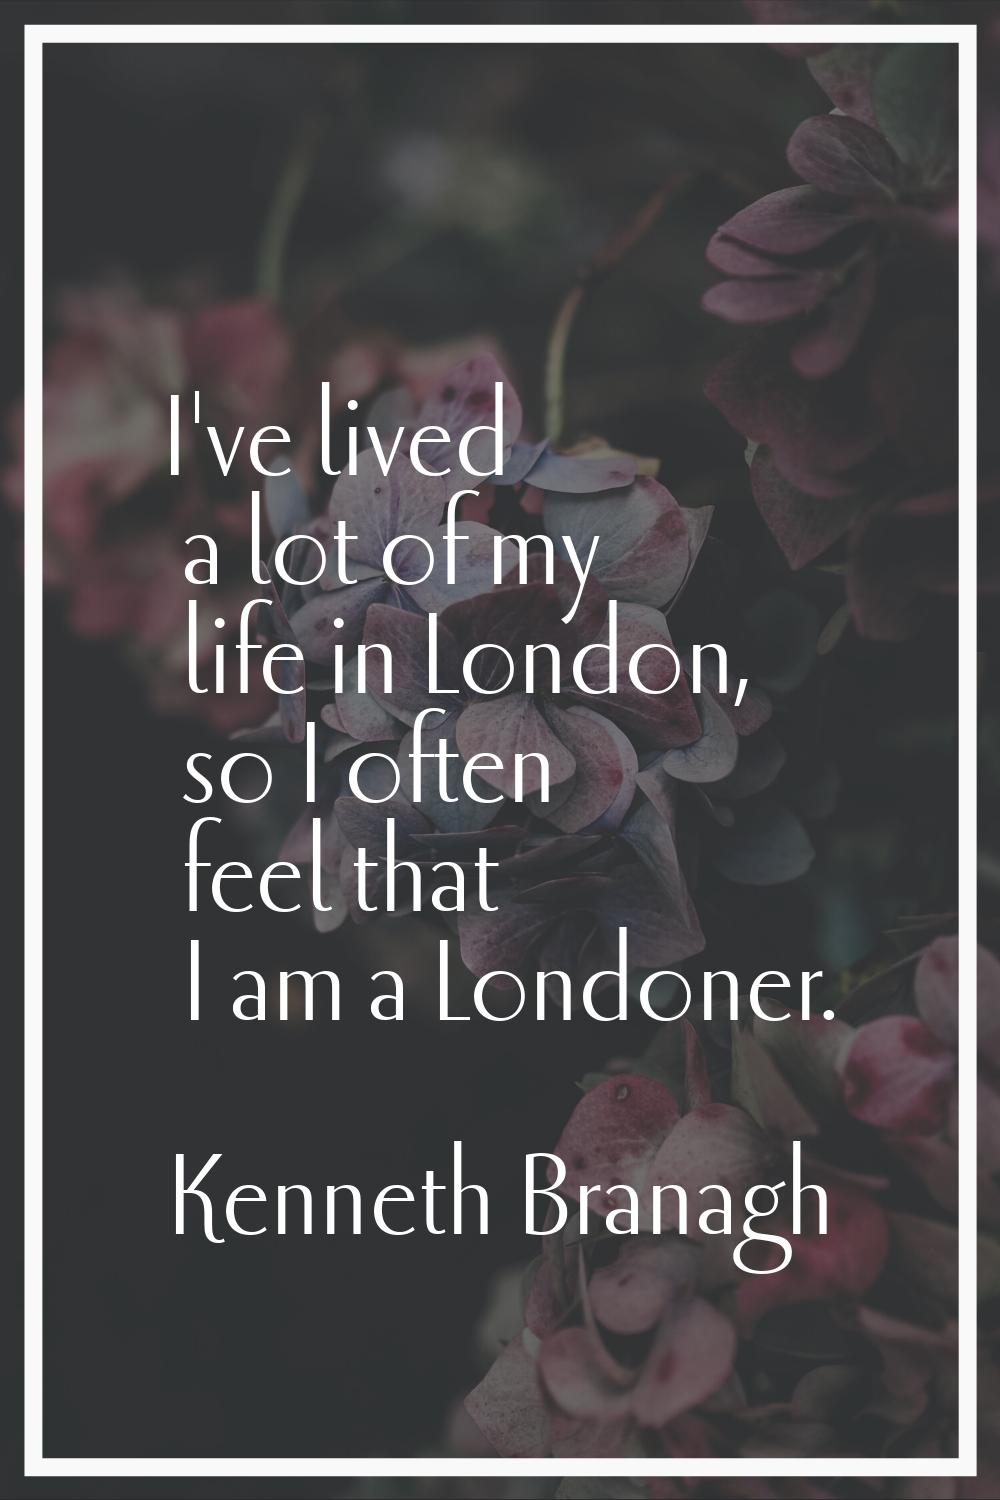 I've lived a lot of my life in London, so I often feel that I am a Londoner.